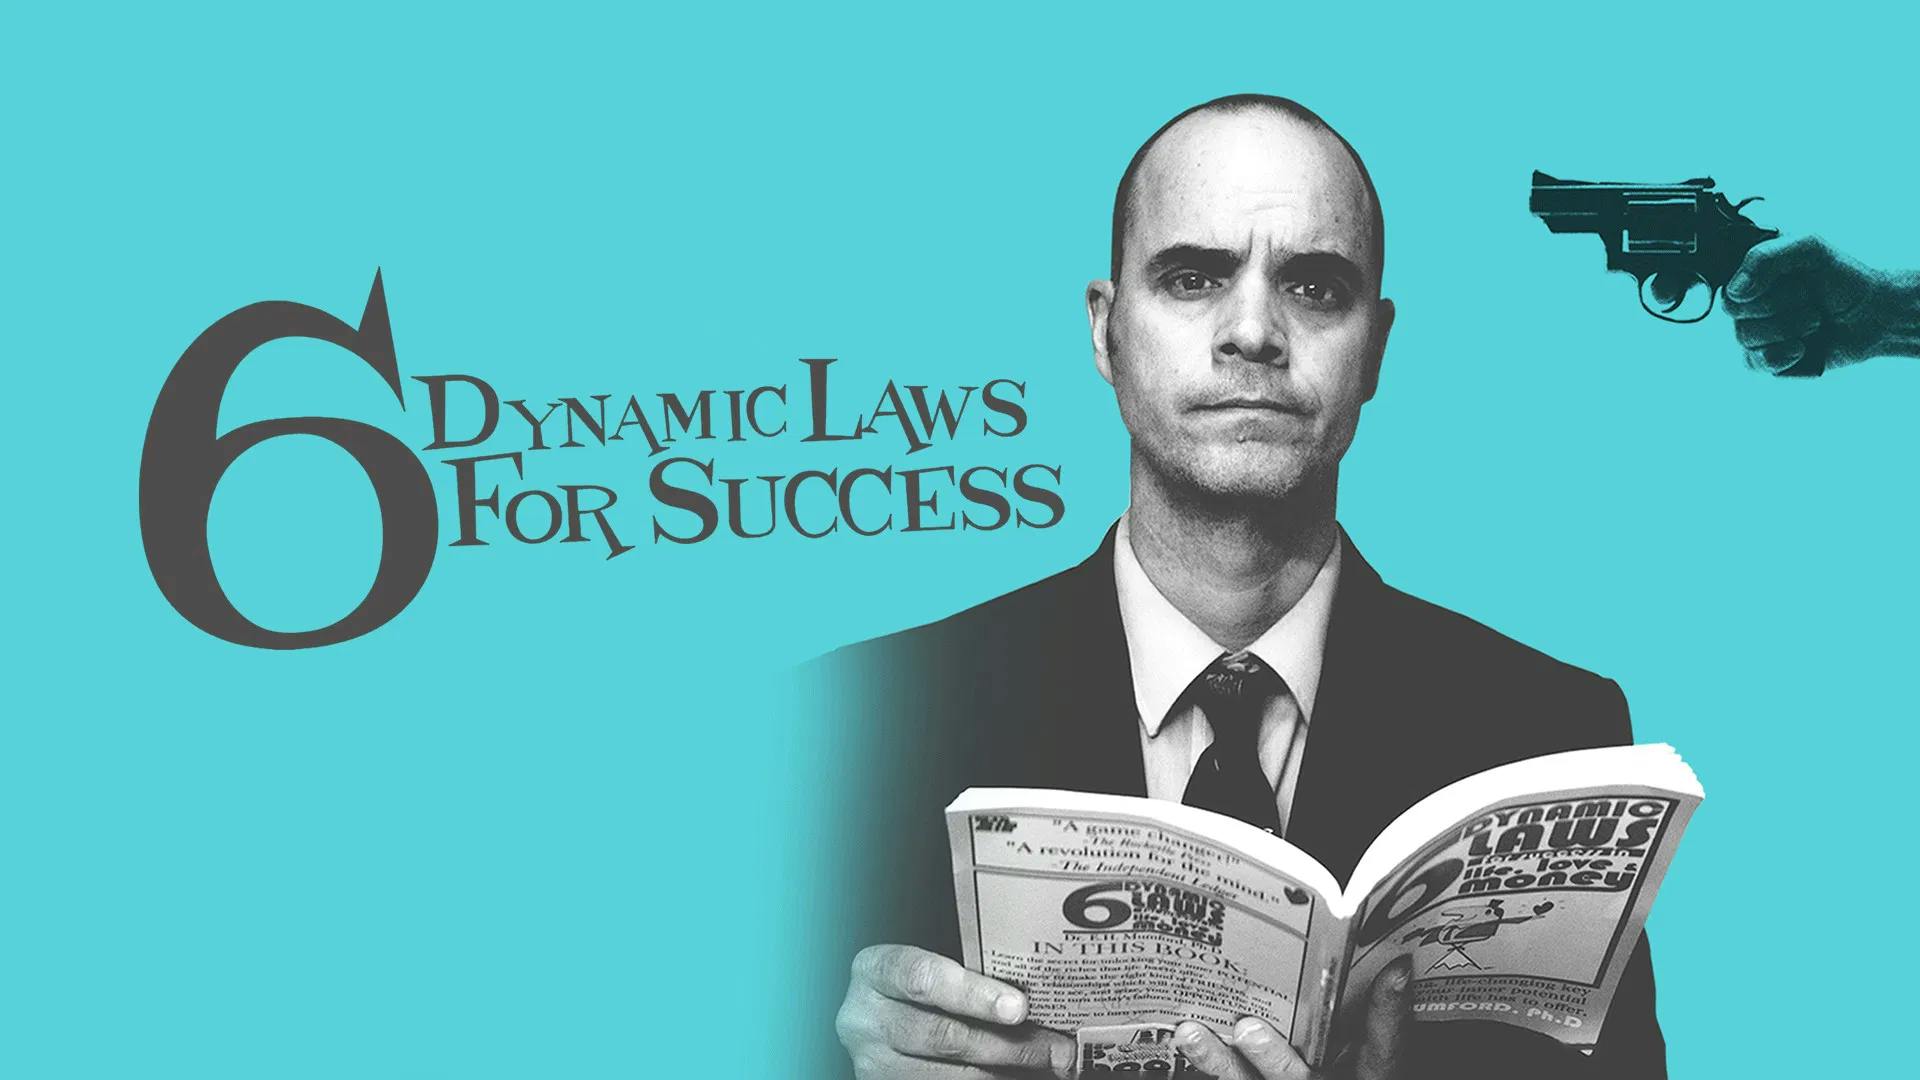 6 Dynamic Laws For Success